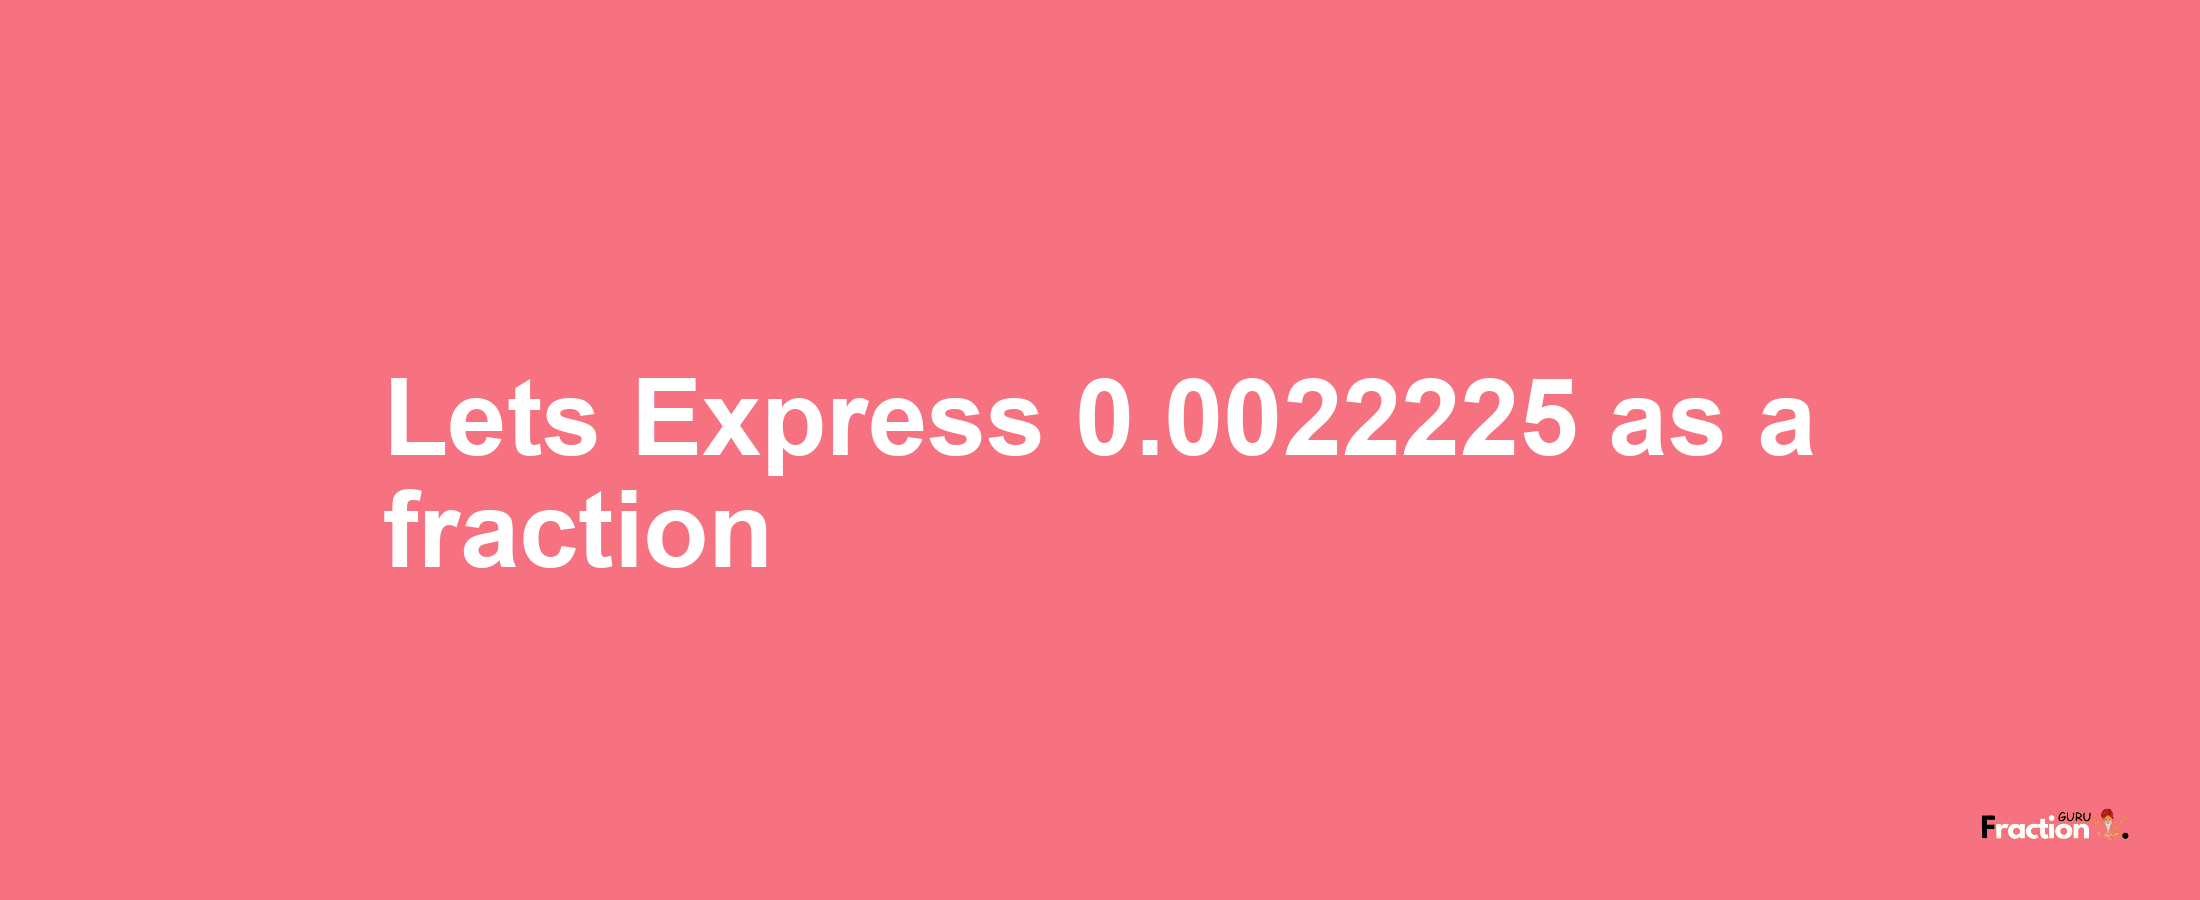 Lets Express 0.0022225 as afraction